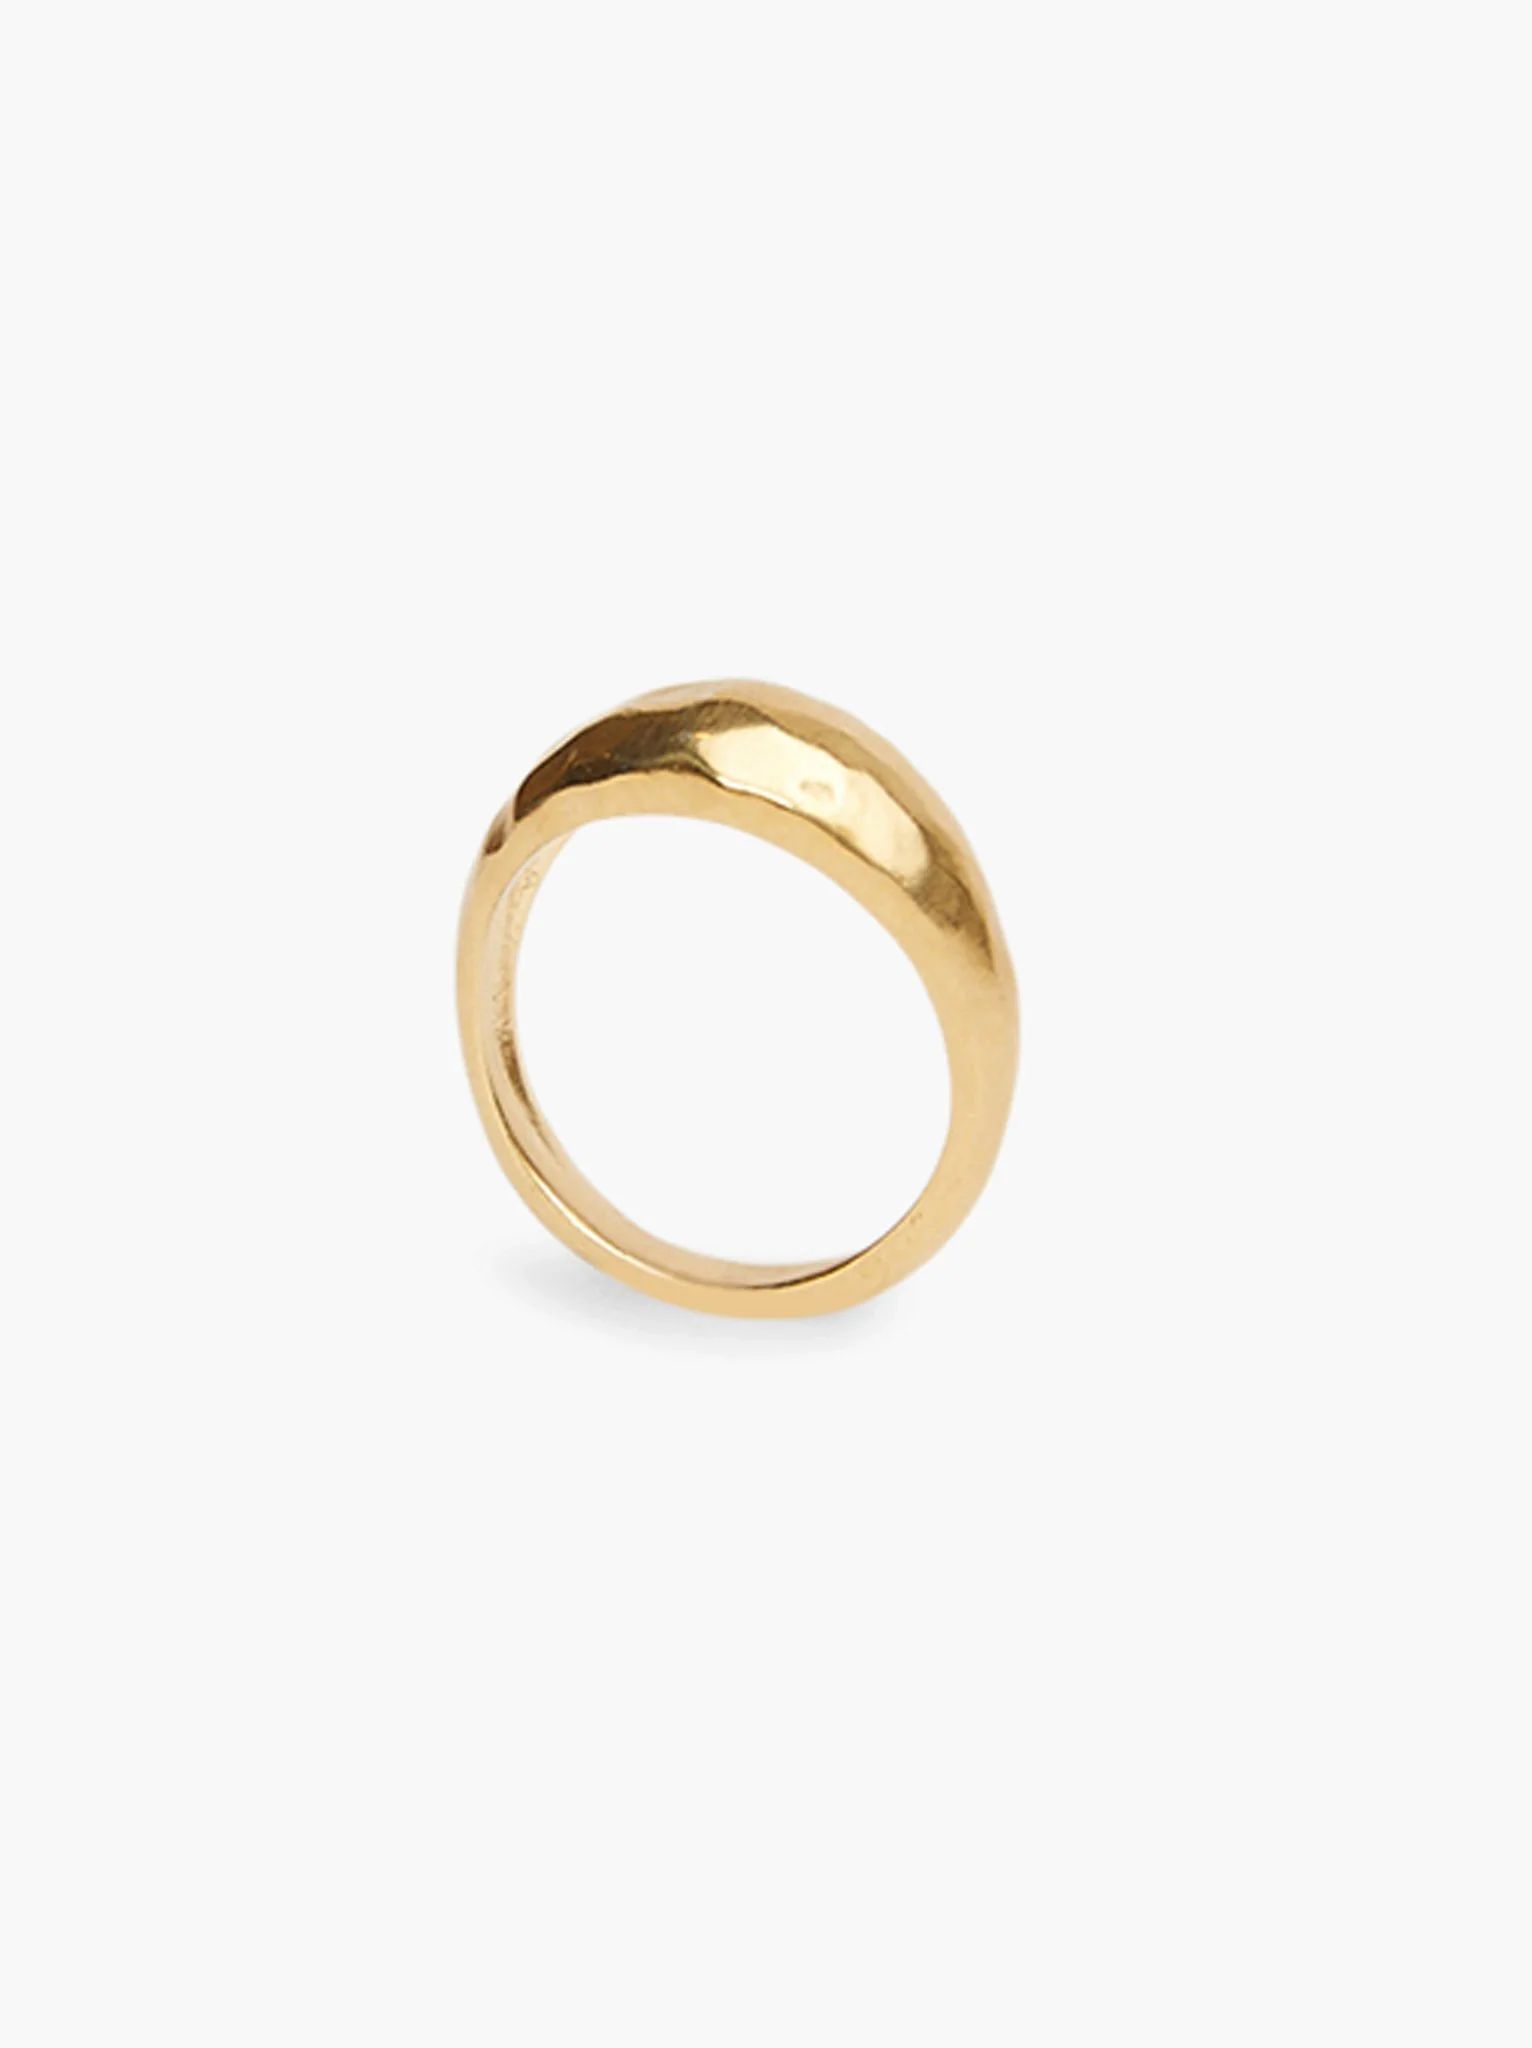 Megan Dome Ring | ABLE